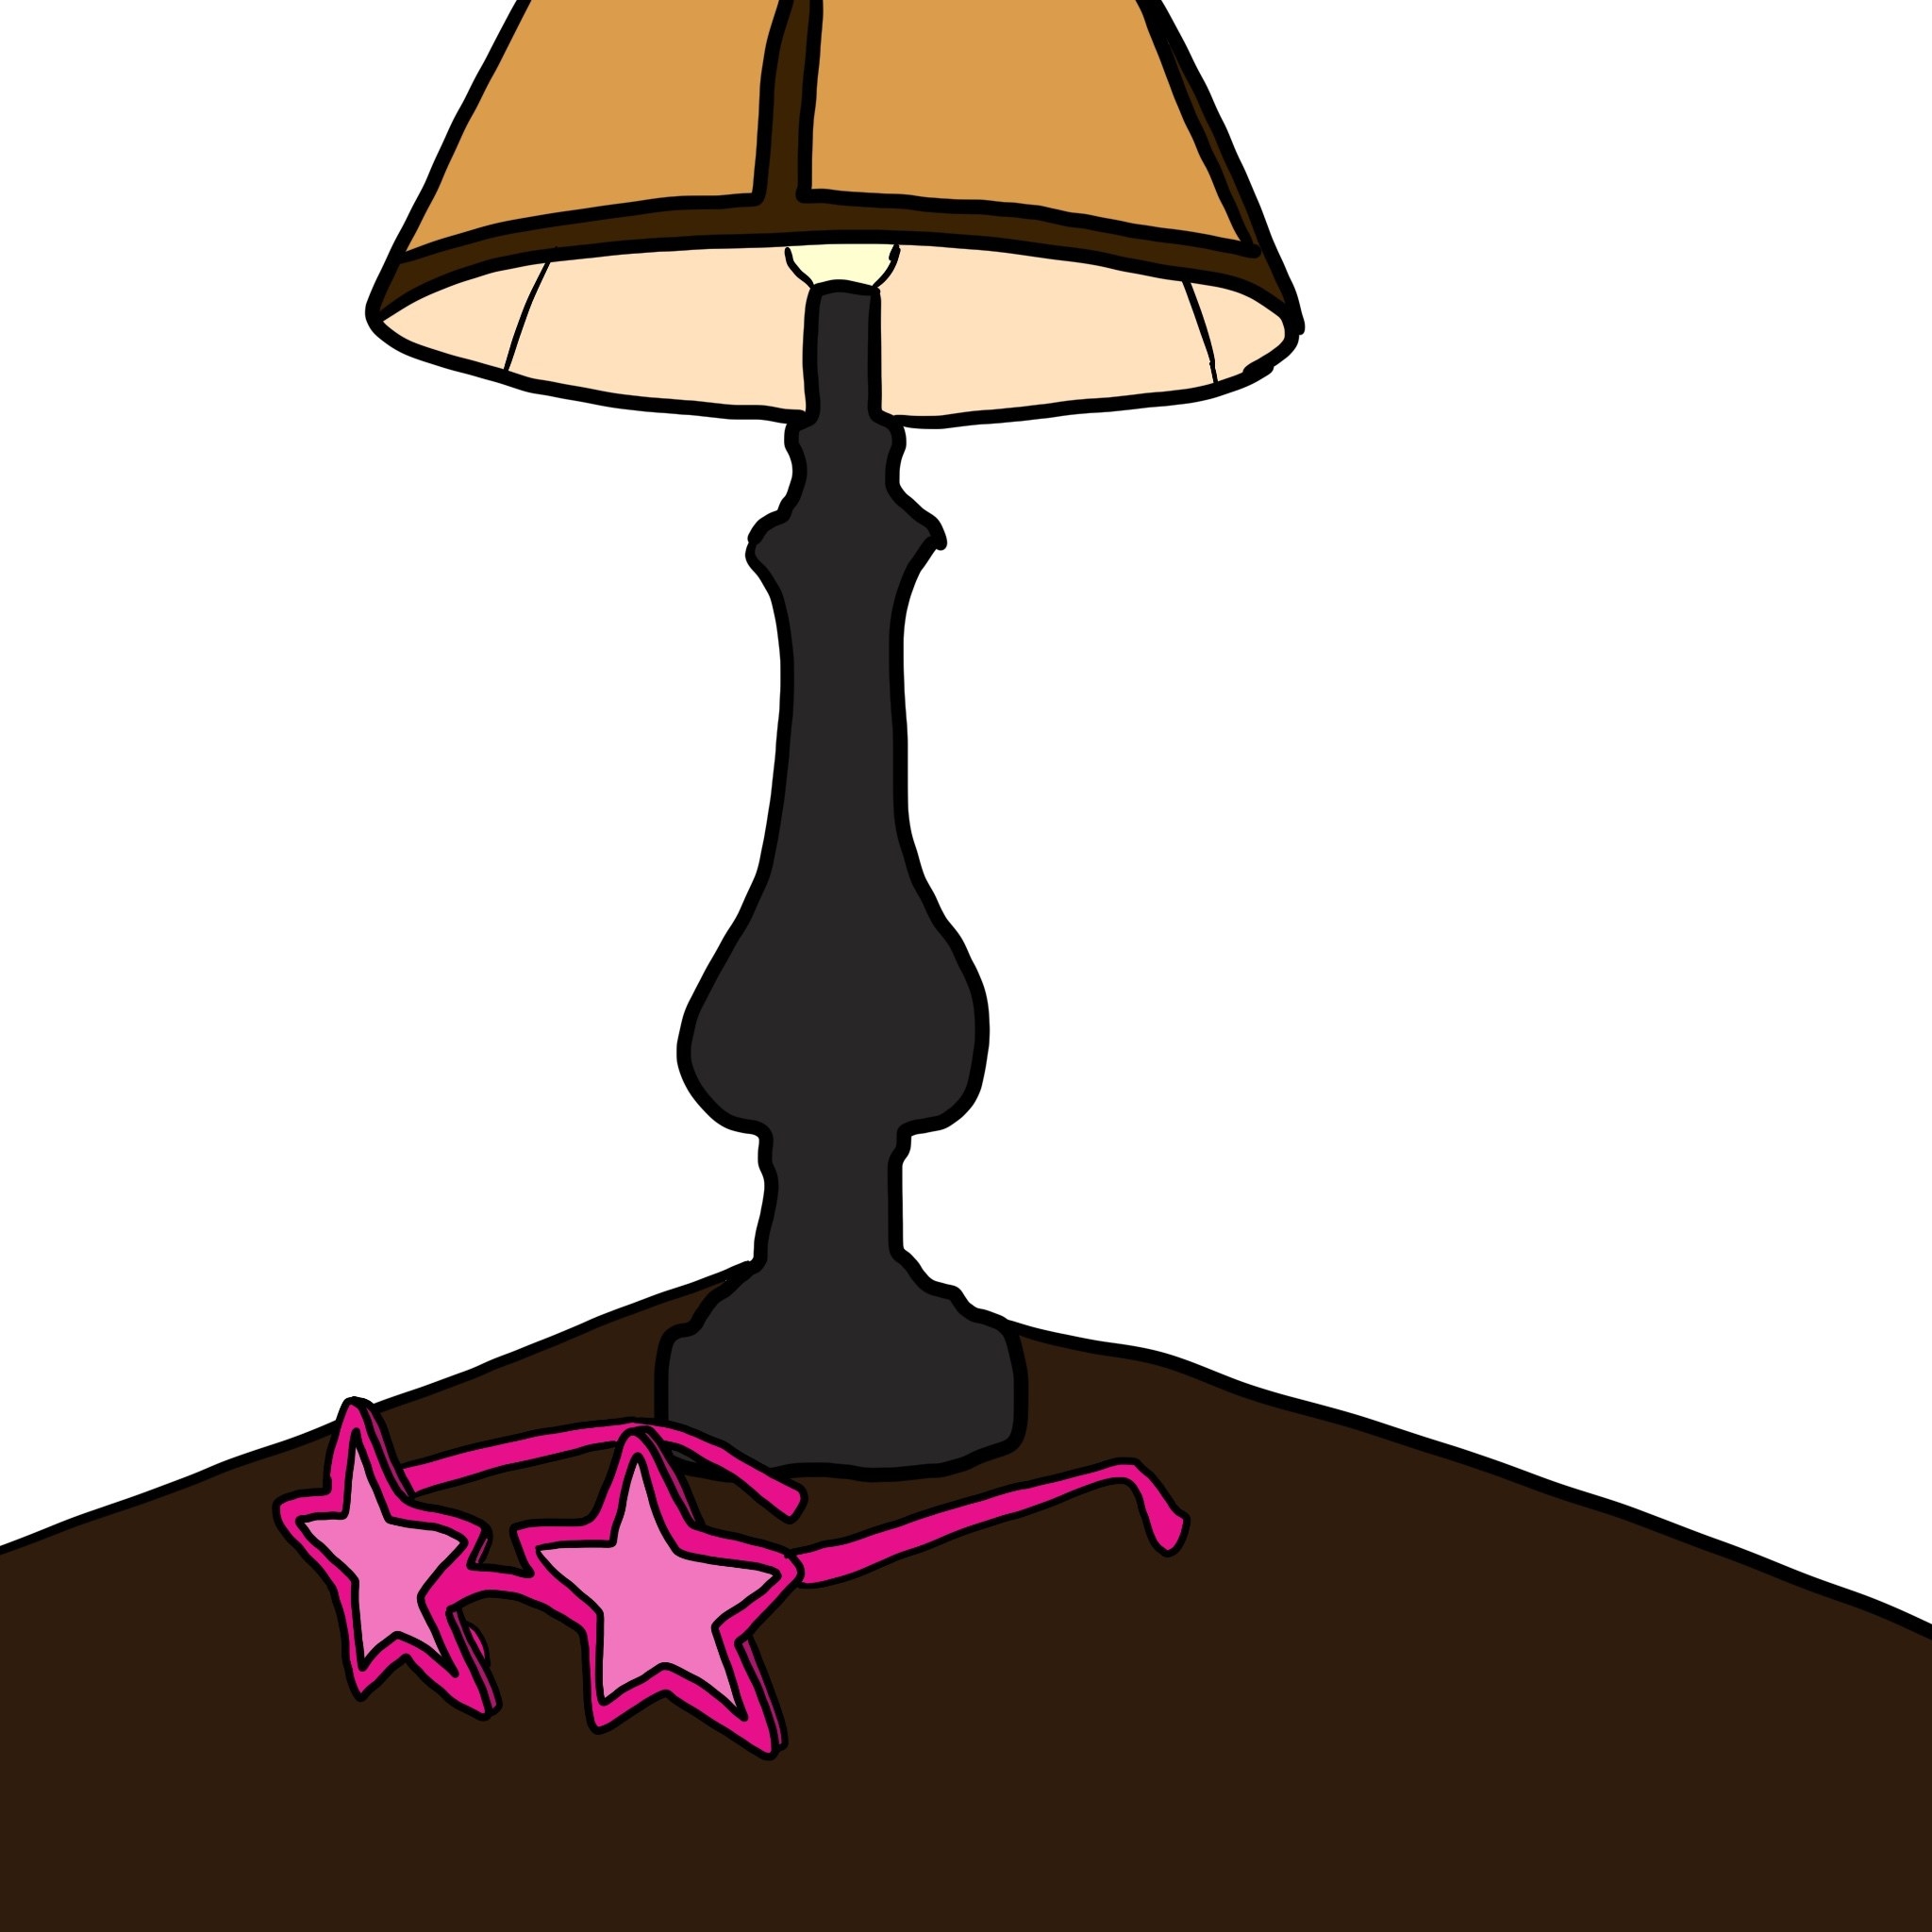 pink star-shaped sunglasses on a nightstand